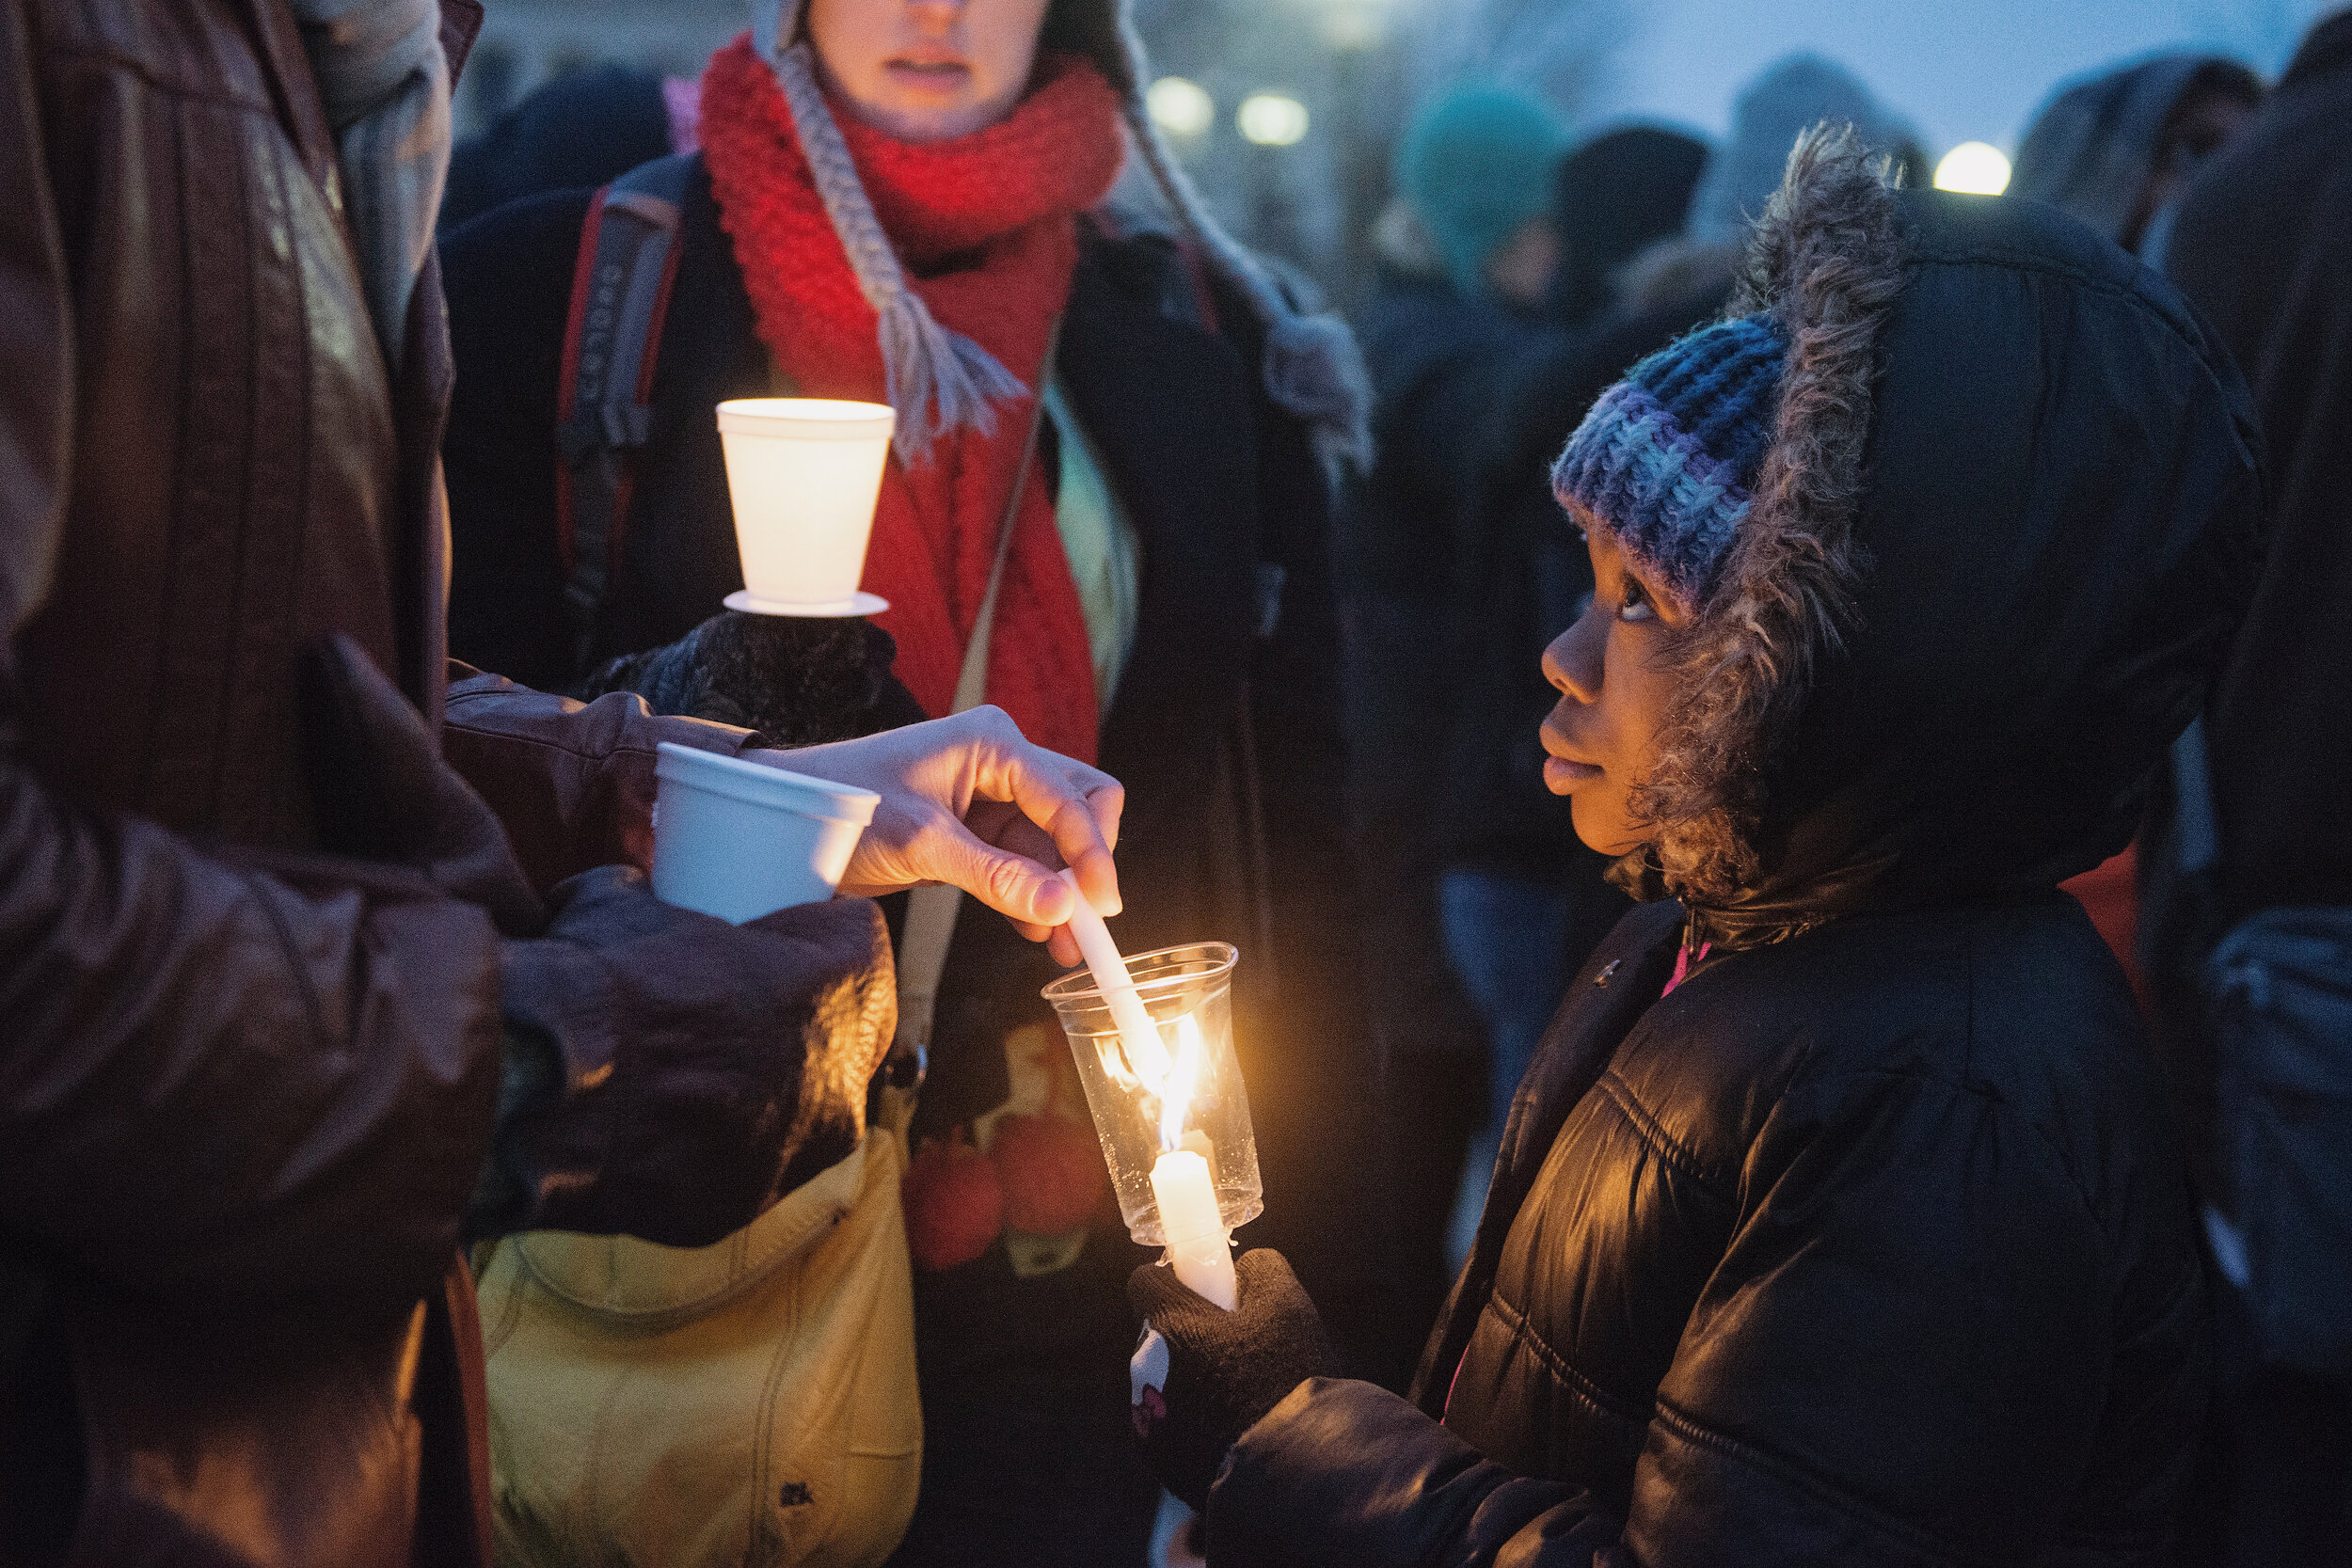  Khilanni Easterling helps ignite the candles of demonstrators in front of the Minnesota State Capitol on Martin Luther King Jr. Day, Jan. 19, 2015. For Minnesota Daily. 